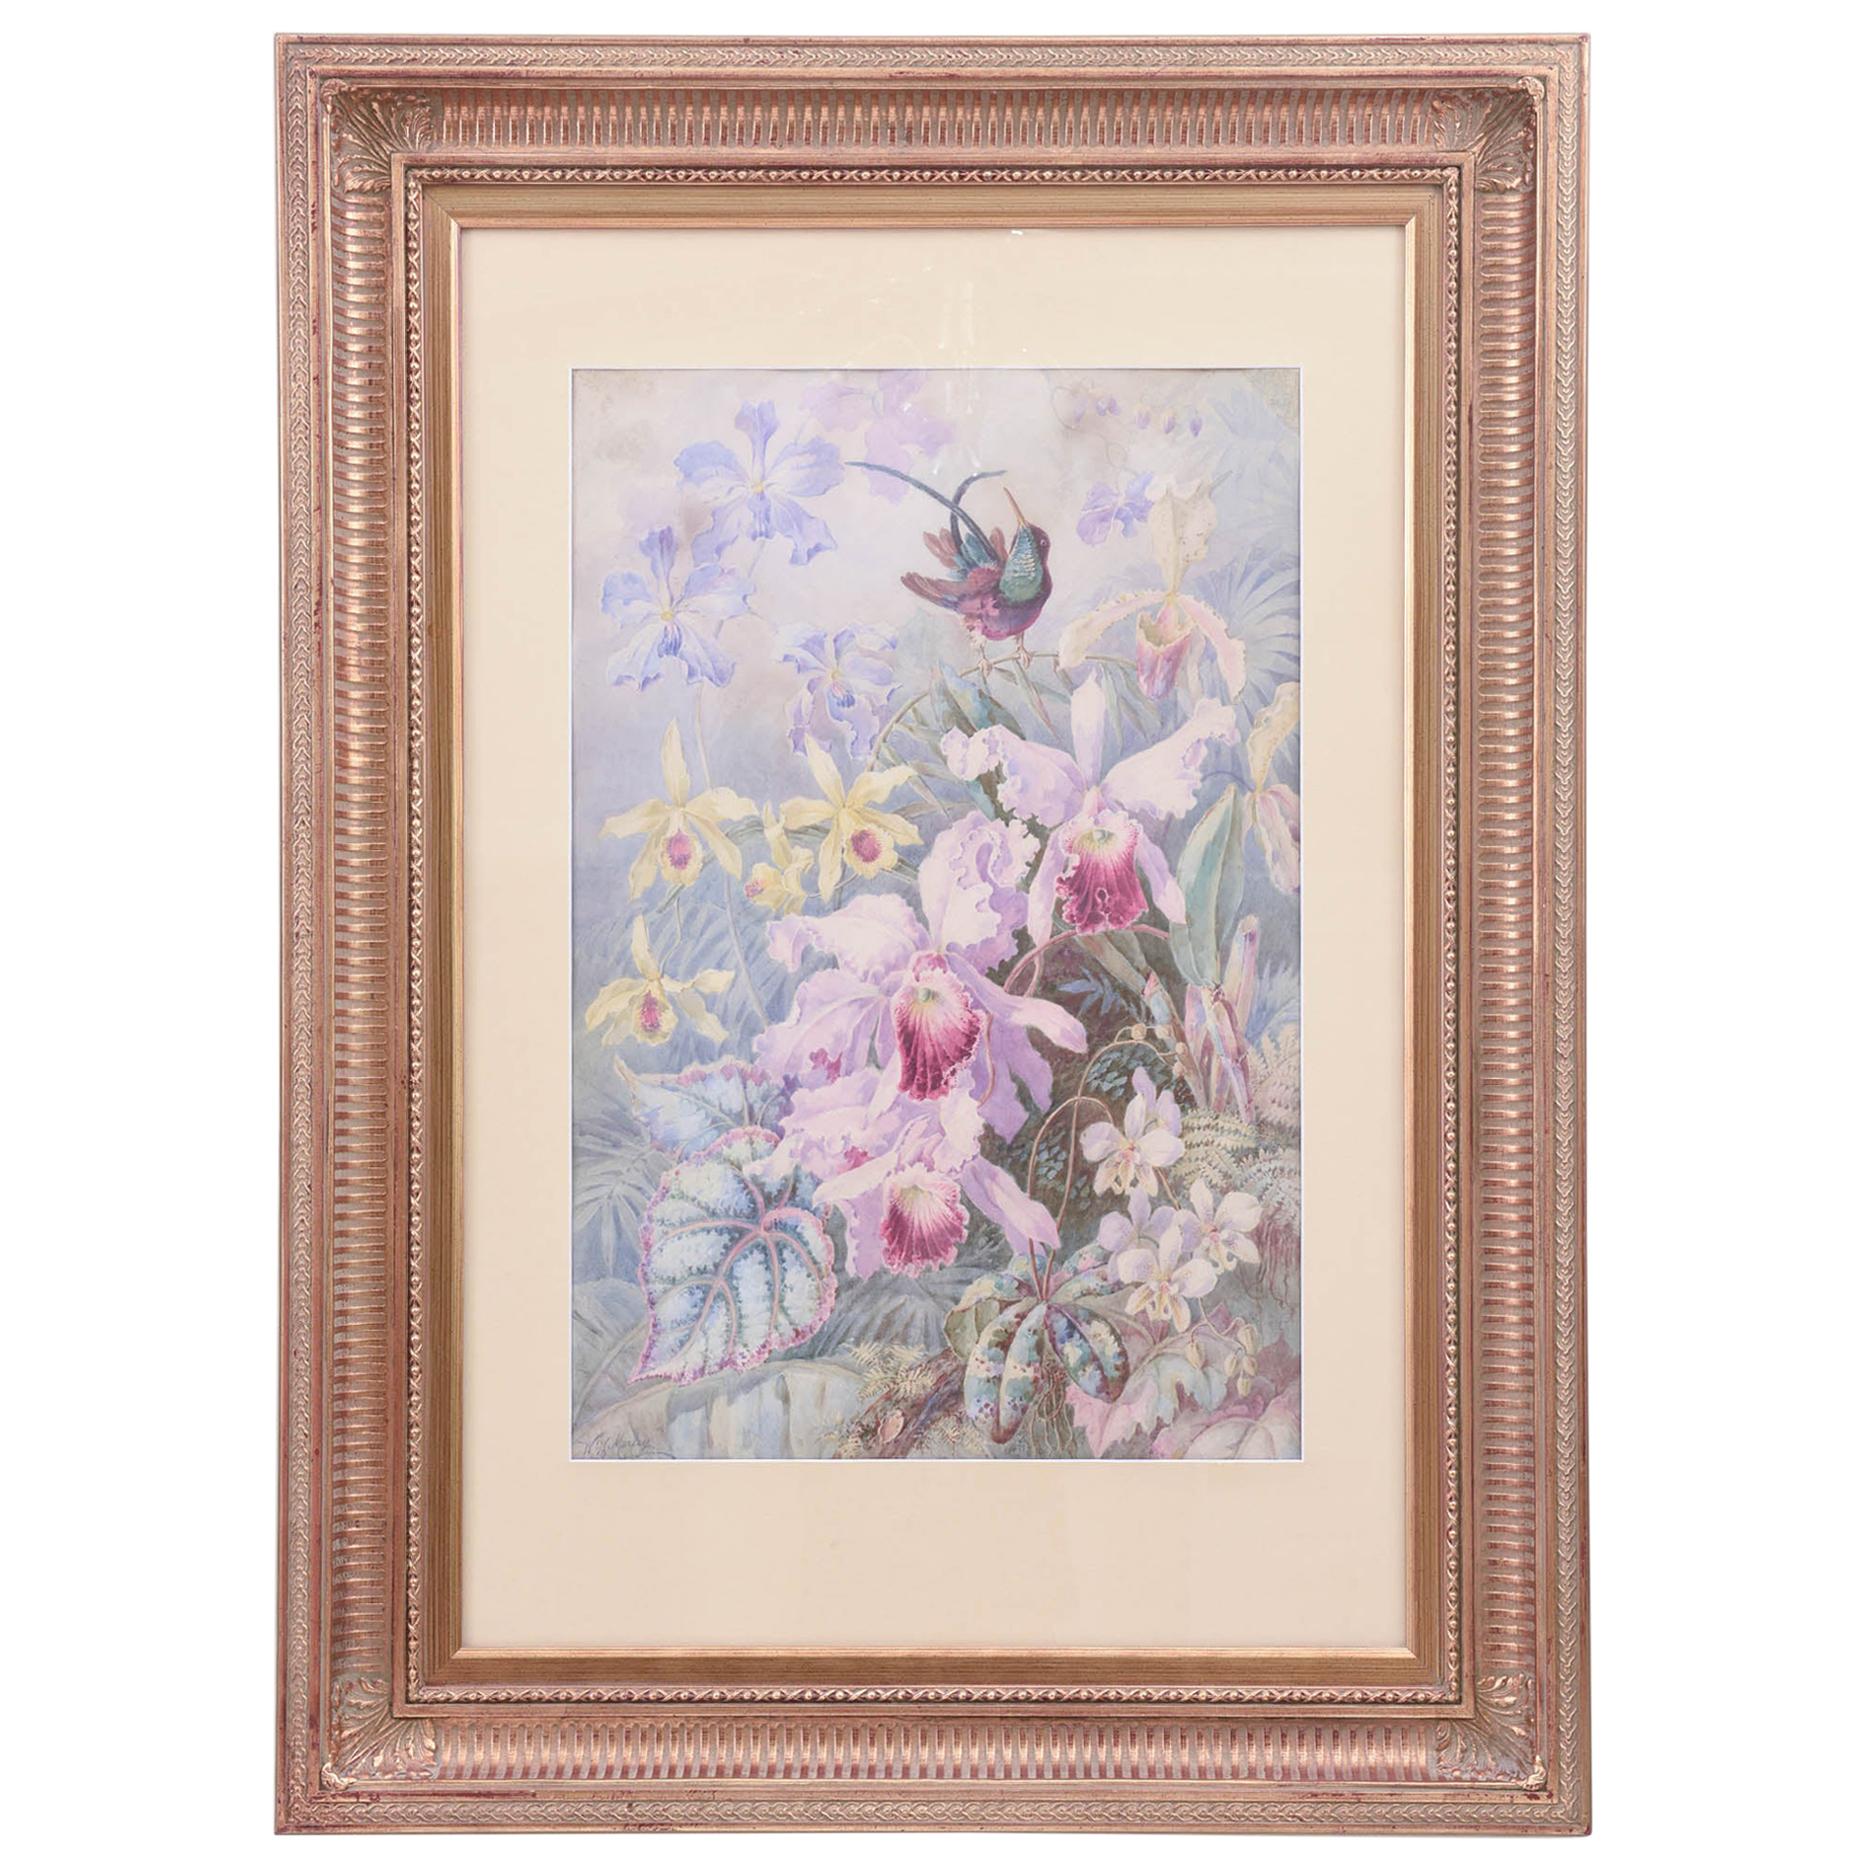 Exquisite Orchid & Hummingbird Watercolor by William Morley, Antique Oversize